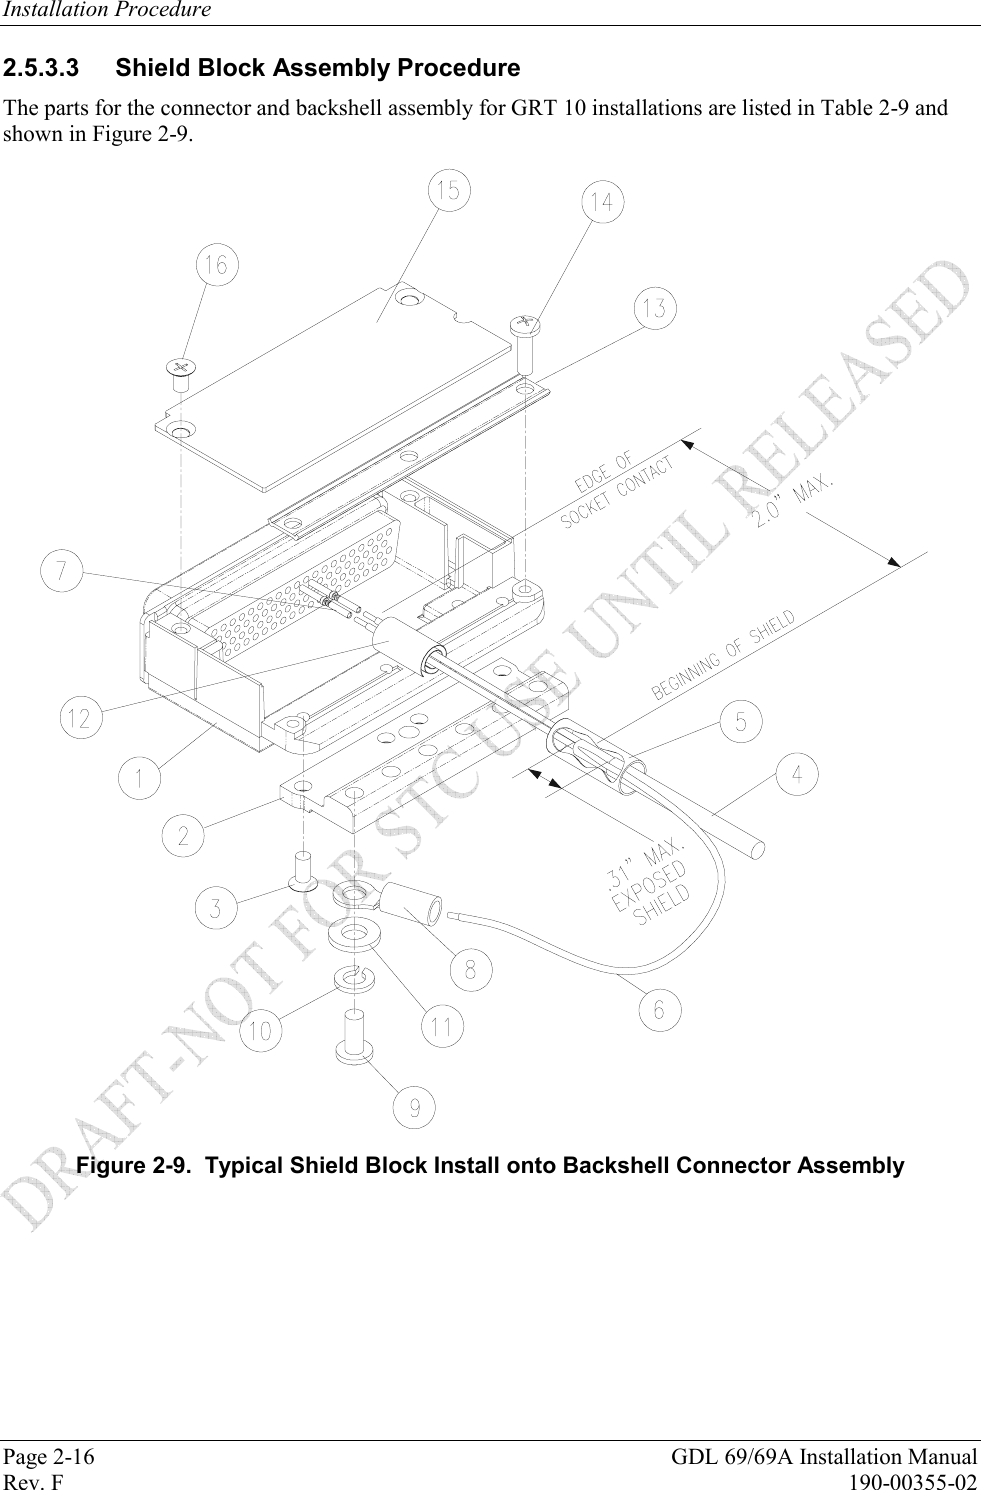 Installation Procedure Page 2-16  GDL 69/69A Installation Manual Rev. F  190-00355-02 2.5.3.3  Shield Block Assembly Procedure The parts for the connector and backshell assembly for GRT 10 installations are listed in Table 2-9 and shown in Figure 2-9.  Figure 2-9.  Typical Shield Block Install onto Backshell Connector Assembly 